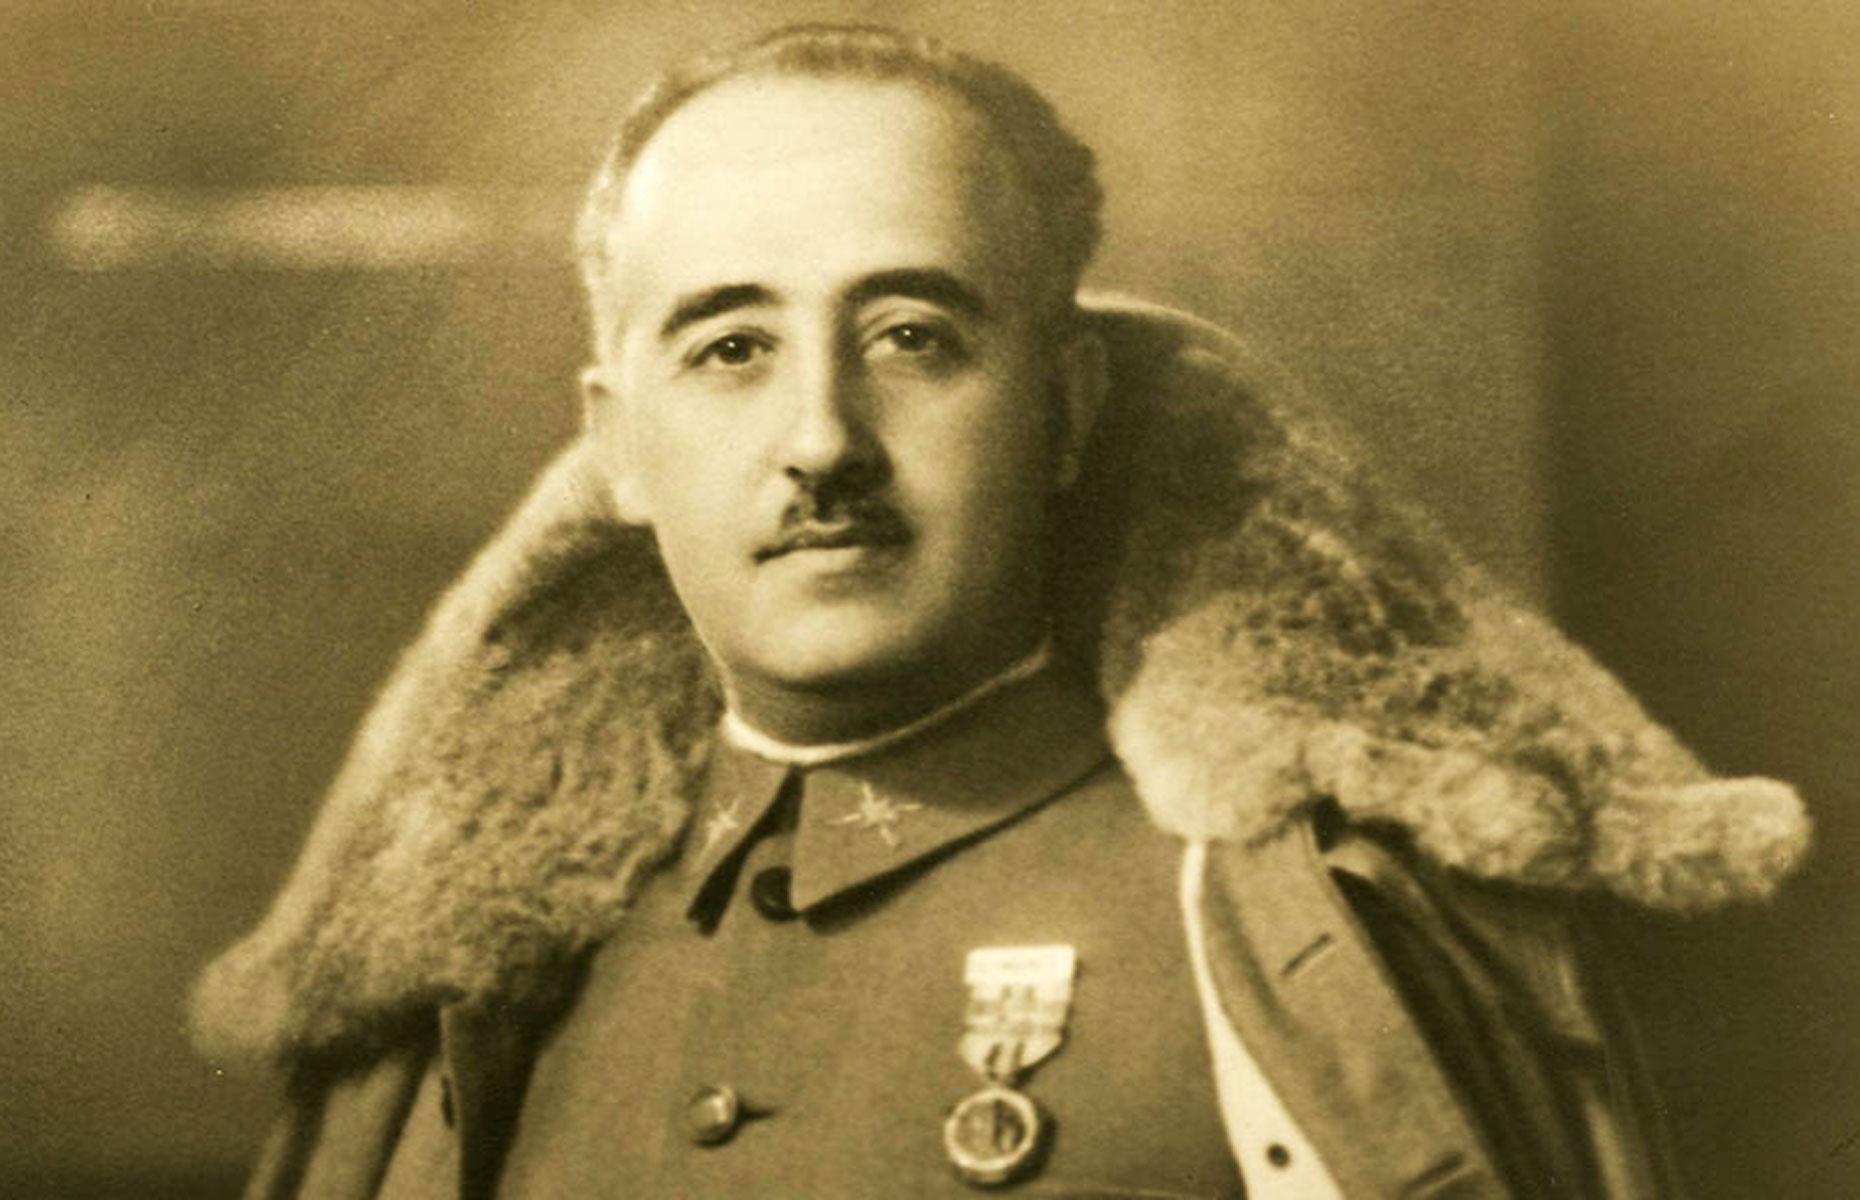 Francisco Franco ruled over Spain from 1939 to his death in 1975, and was responsible for the murder of hundreds of thousands of people, mainly republicans and other political dissenters. Upper estimates of the dictator's wealth in 1975 amount to 100 billion pesetas, which works out at around $3.8 billion in today's money.